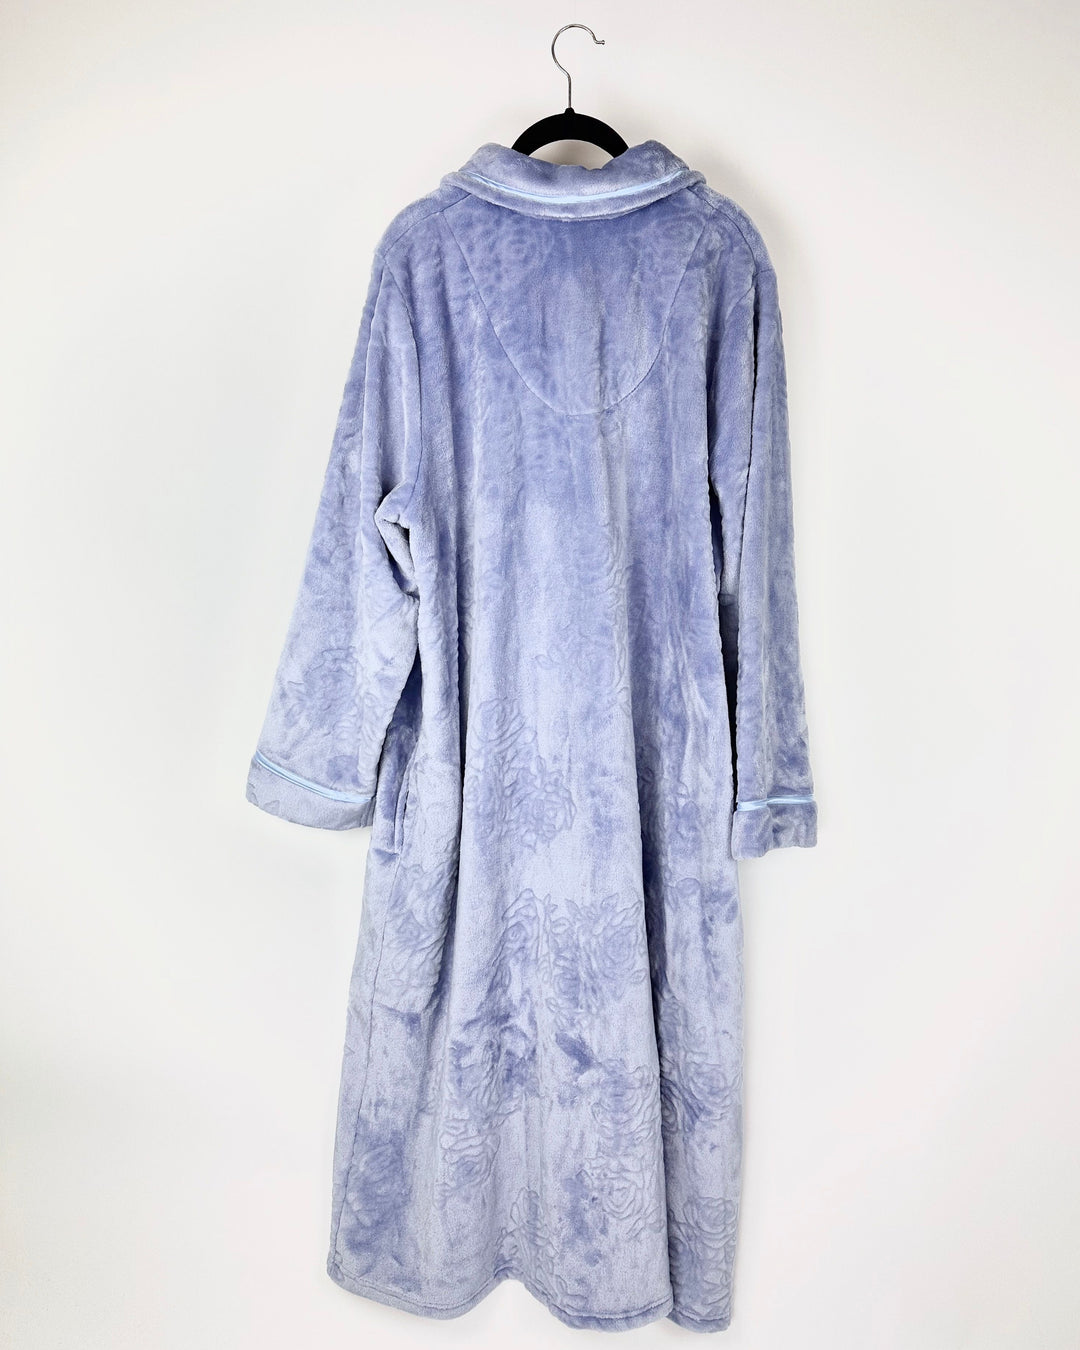 Periwinkle Zip Up Robe - Size 6/8